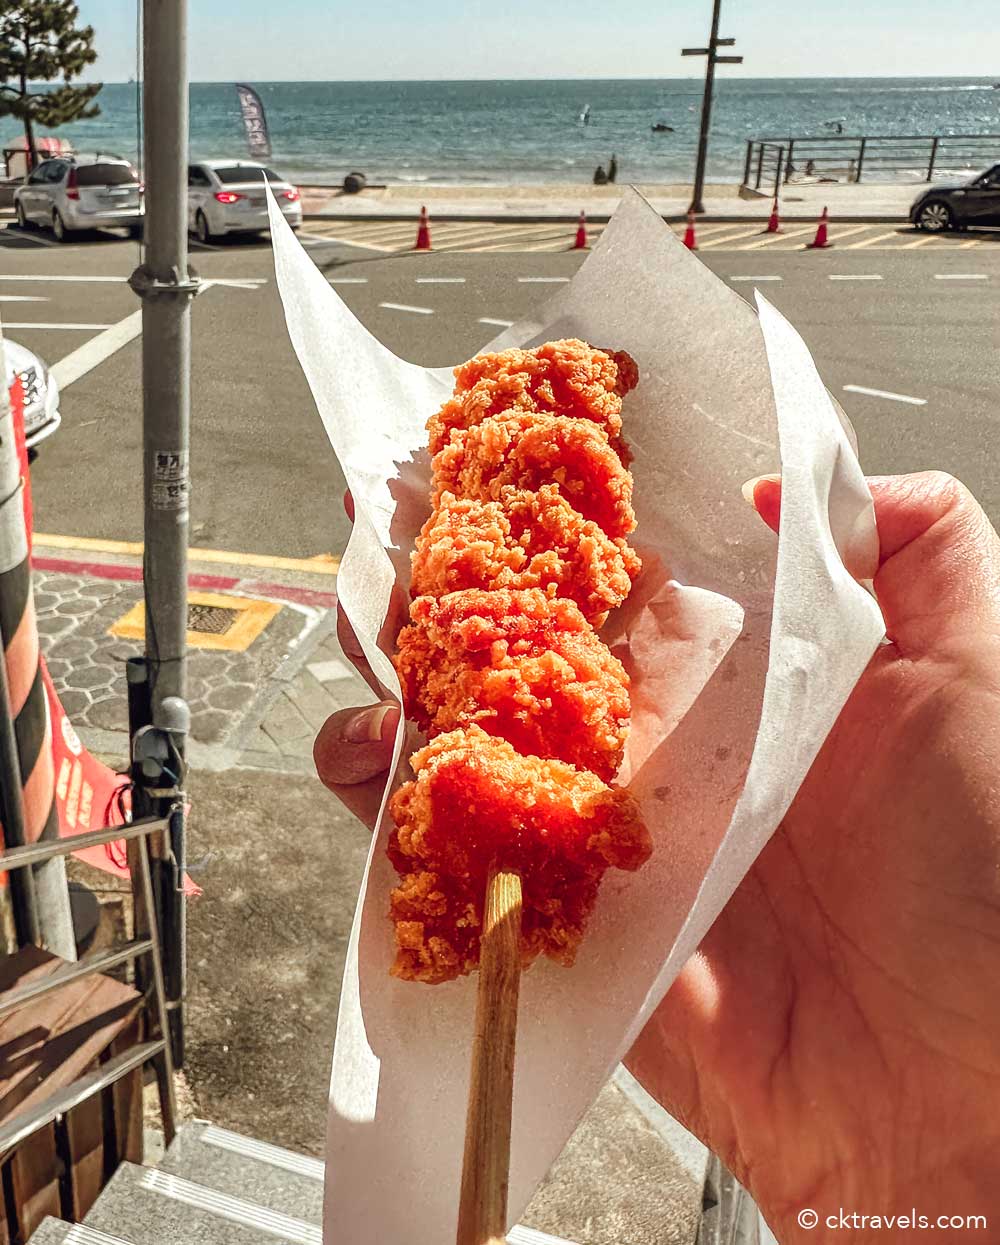 Korean fried chicken on a stick from CU convenience stores in South Korea